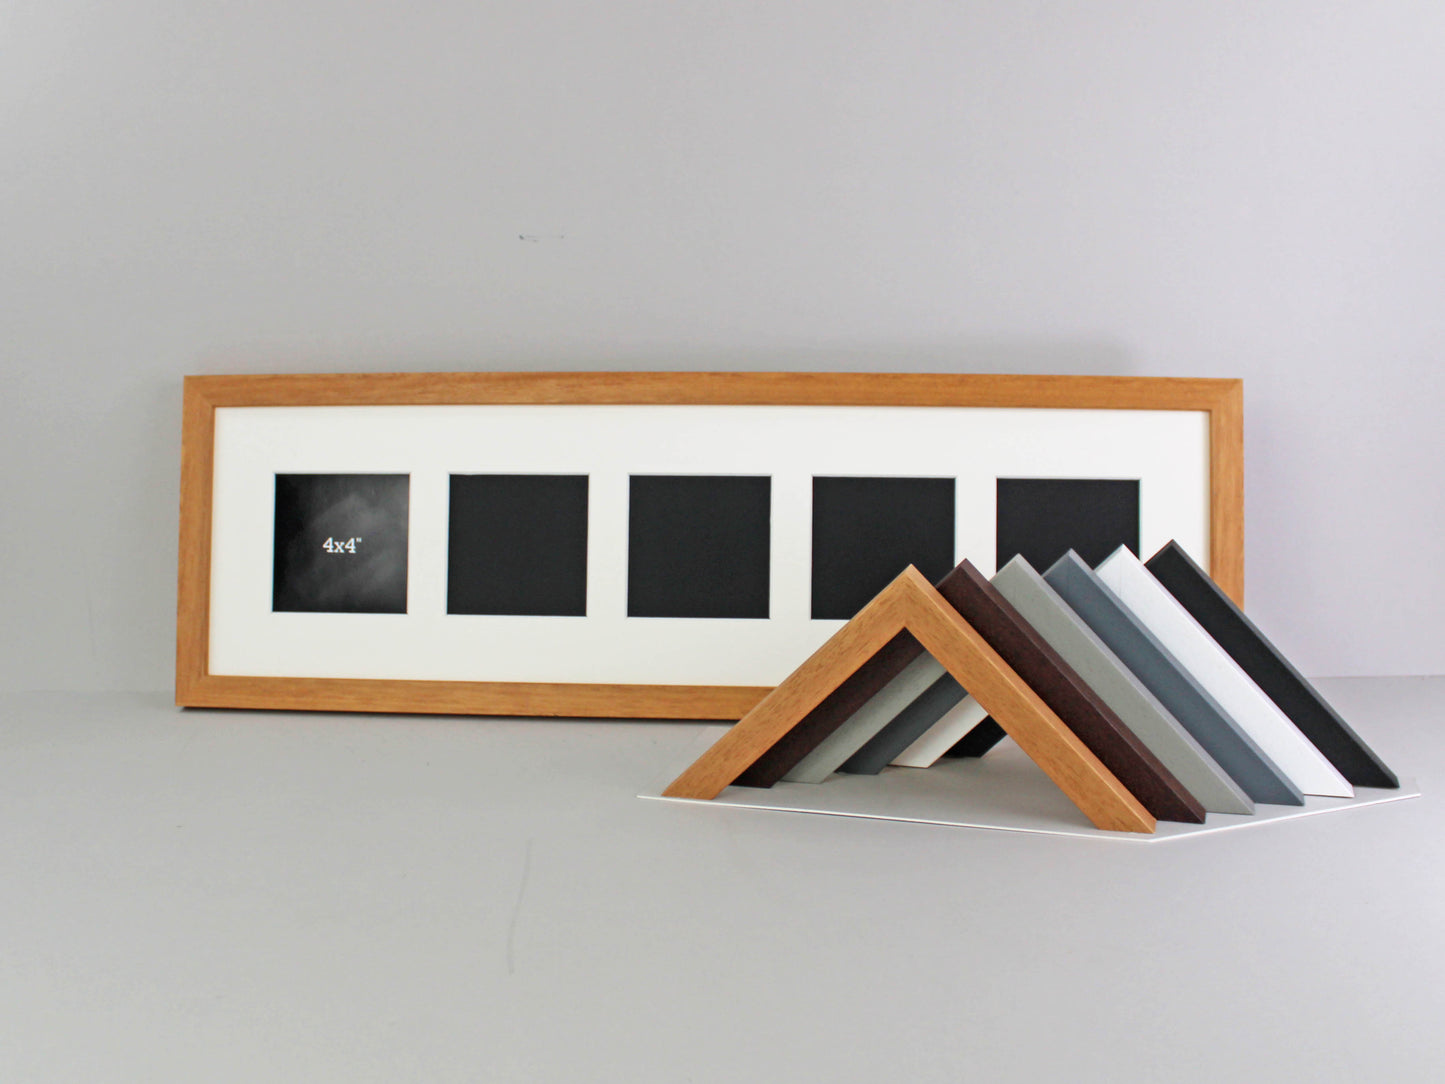 Multi Aperture Photo Frame. Holds five 4x4" sized images. 20x70cm. Perfect for Instagram Pictures!